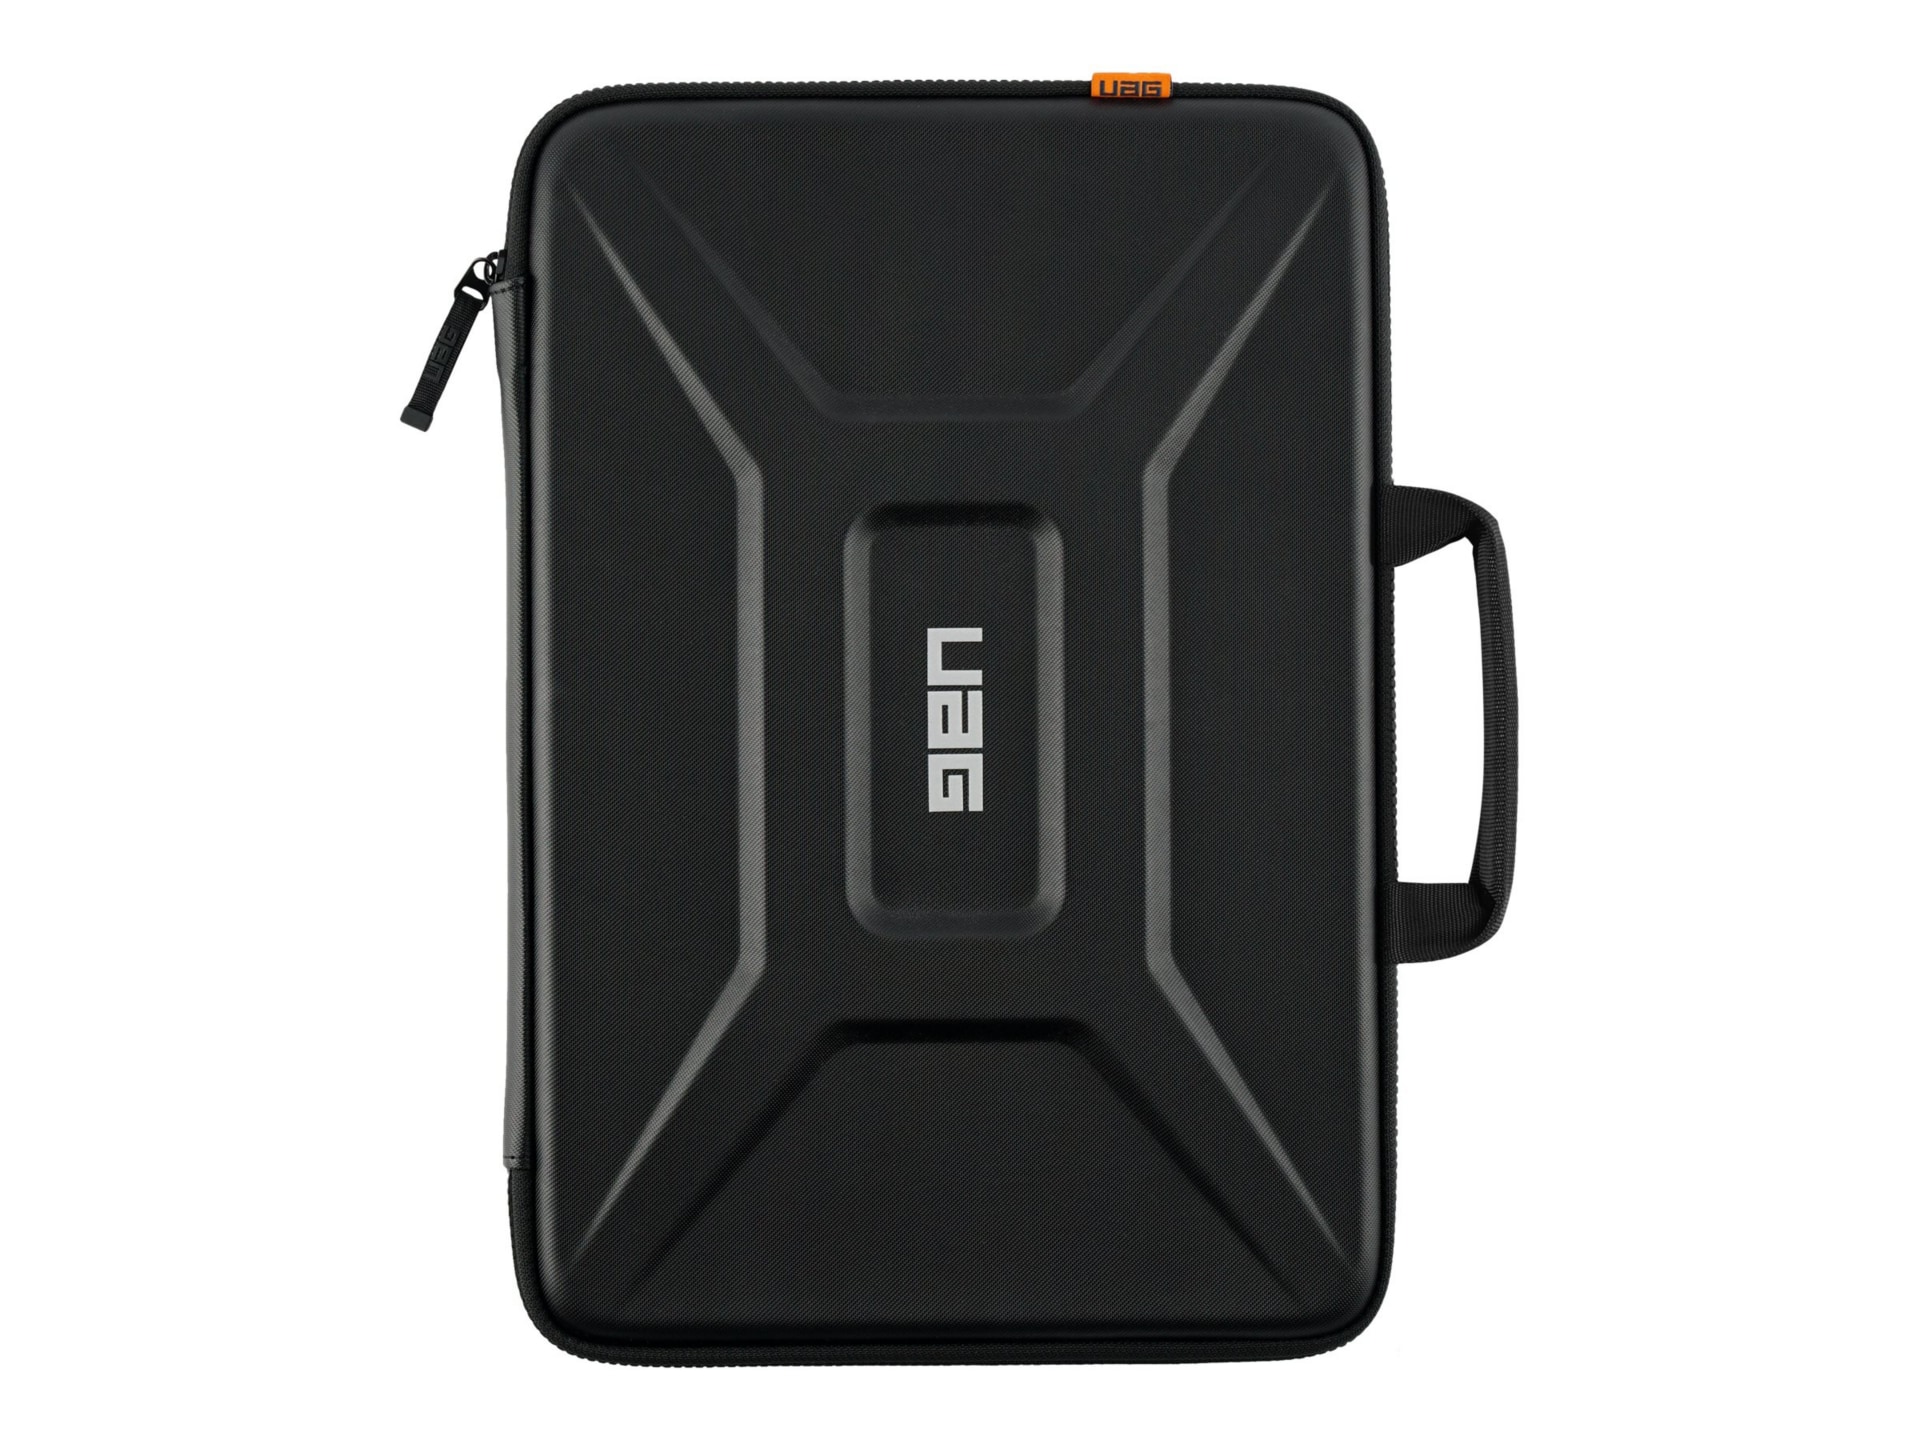 UAG Rugged Sleeve with Handle fits 11 - 13" Tablets/Laptops  -  Black